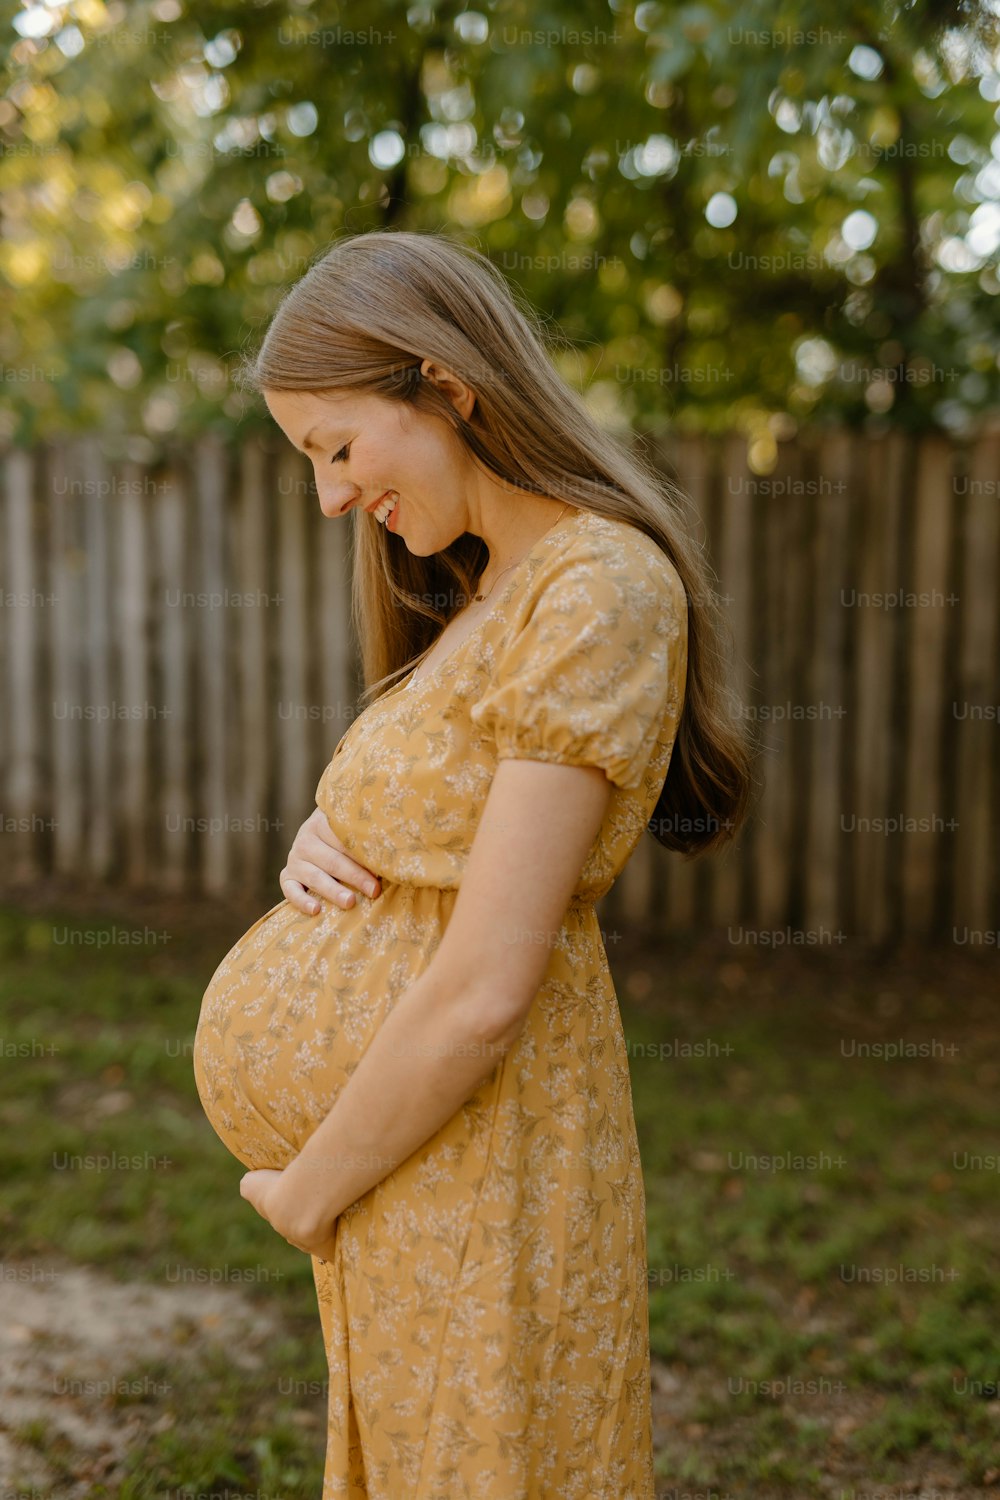 a pregnant woman in a yellow dress standing in front of a fence